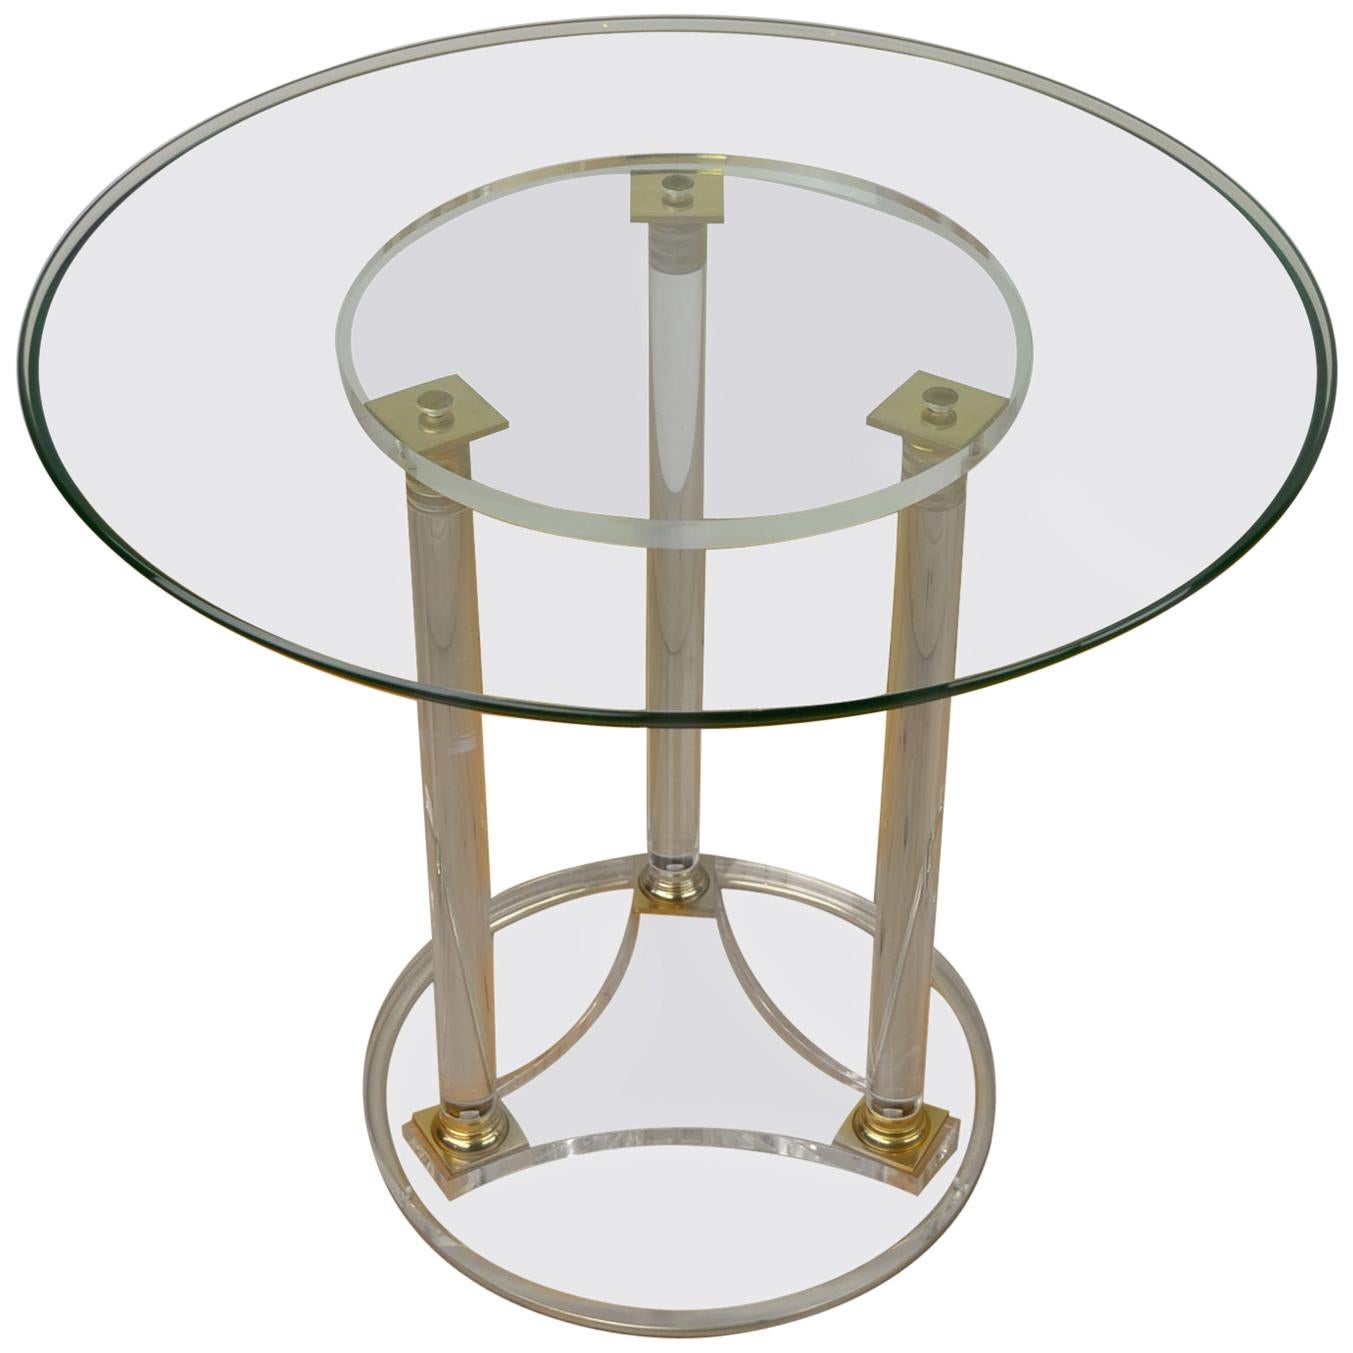 Round Lucite with Brass Side Table, Modern Design Table, France, 1970s